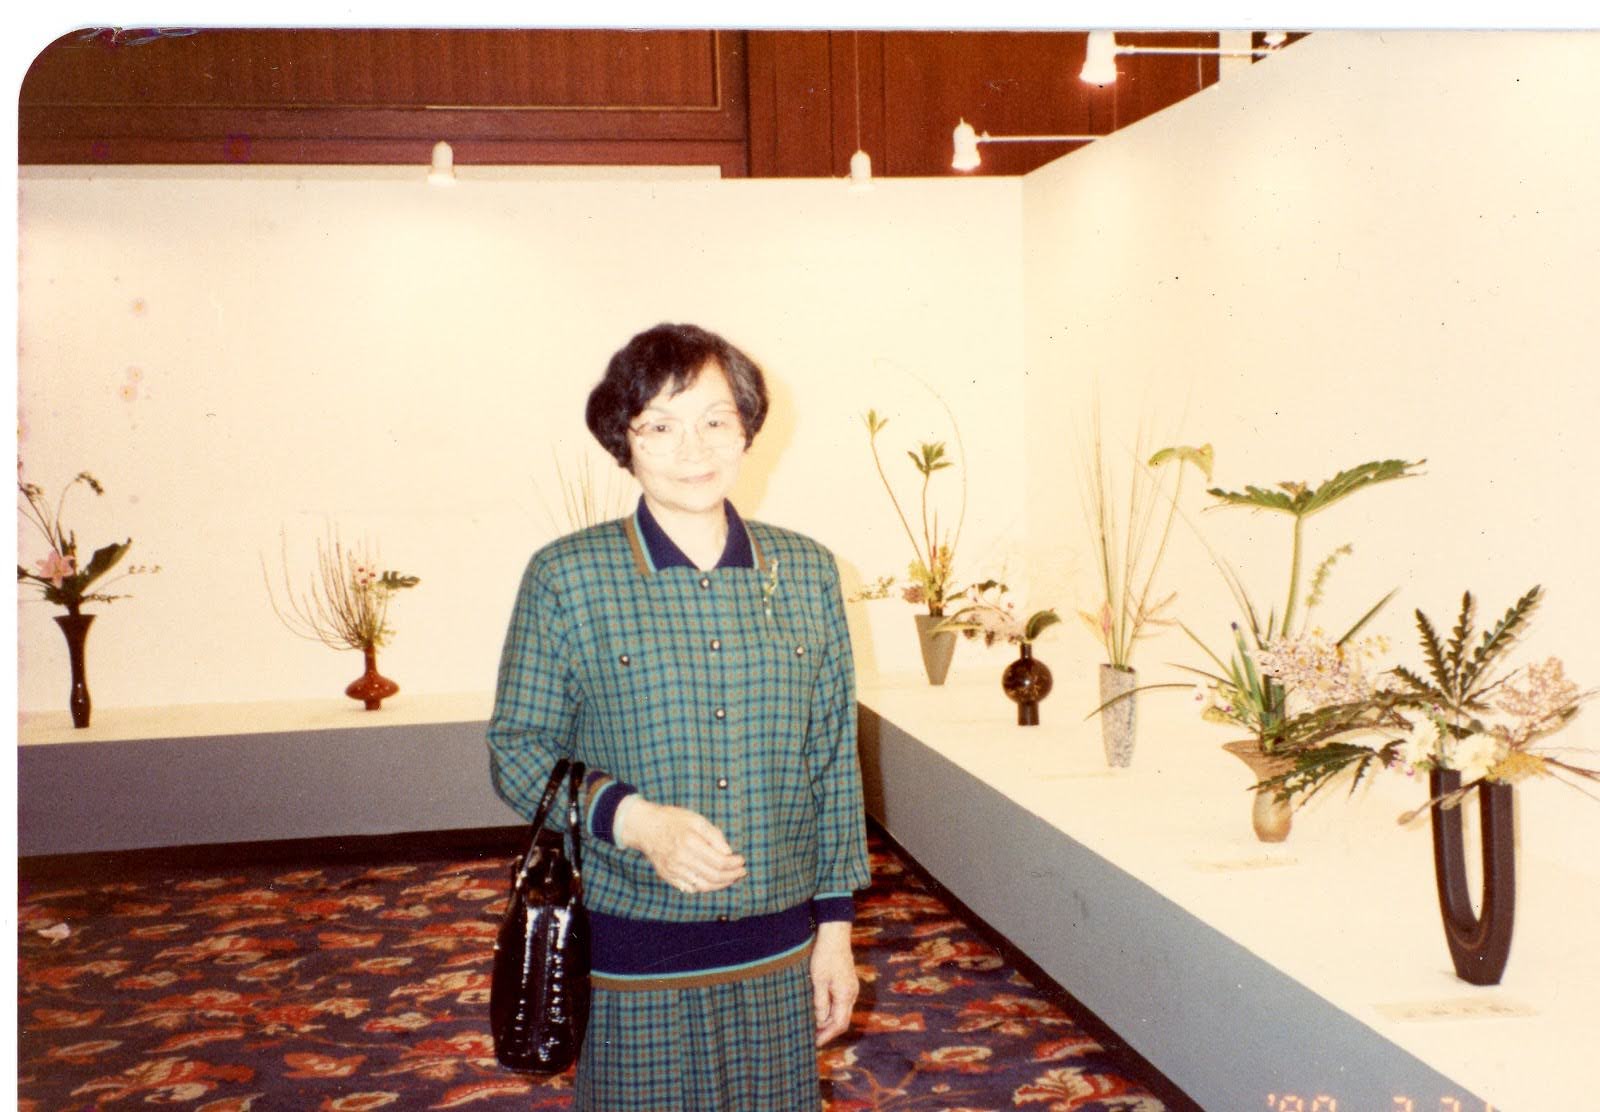 Image Description: Umi Hsu's Ahma wearing green and blue plaid jacket and skirt, gently smiling and standing in front of a row of ikebana arrangements on display in a gallery.